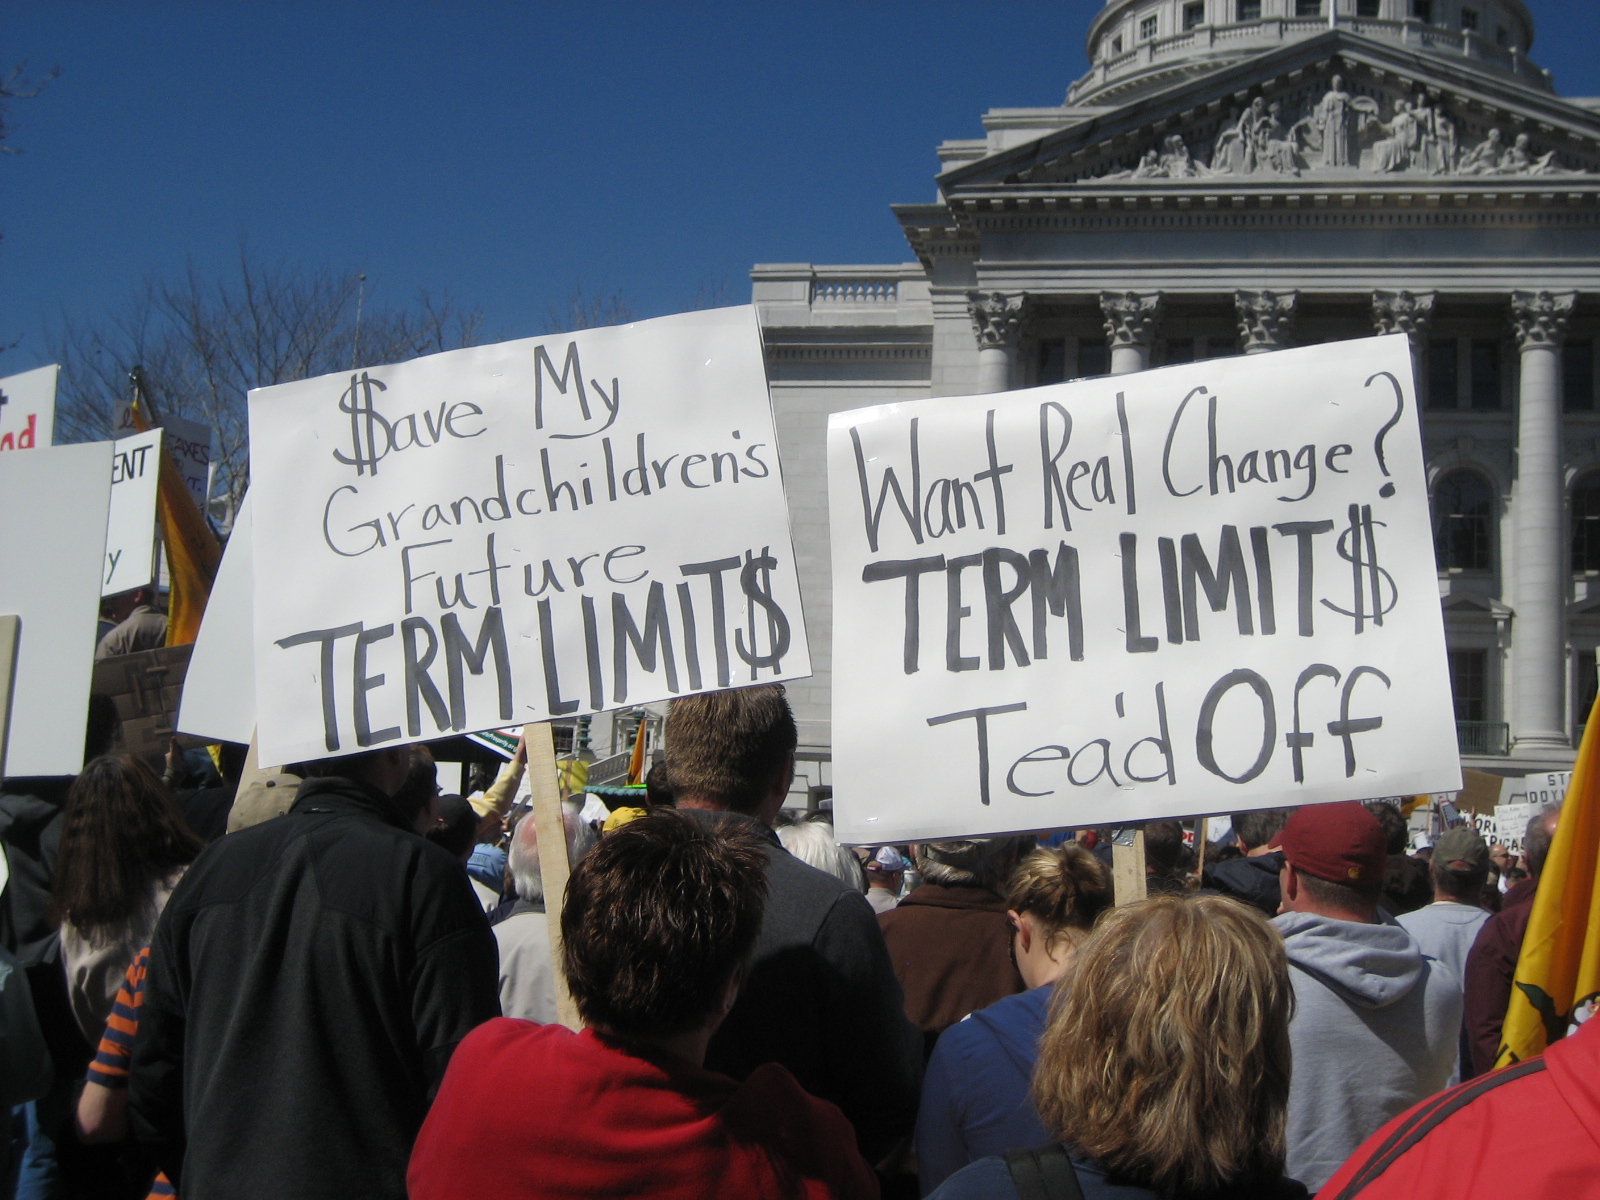 The Downsides of Term Limits